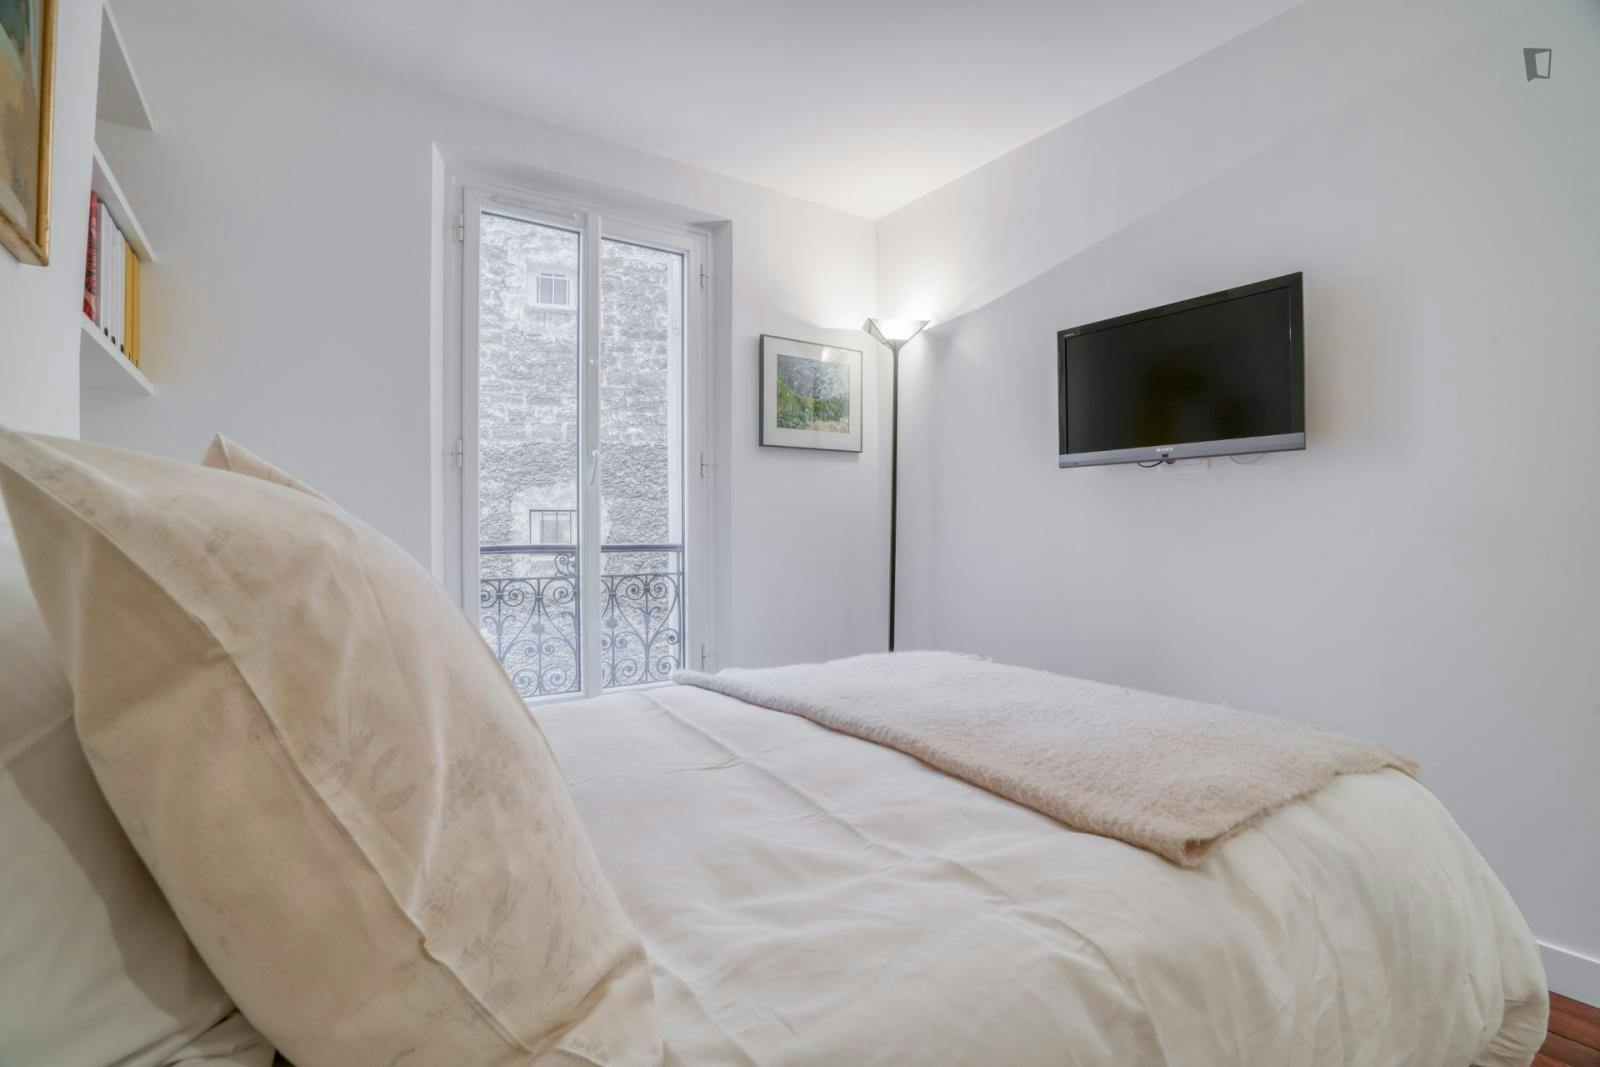 Lovely 1-Bedroom apartment close to Sèvres-Lecourbe metro station